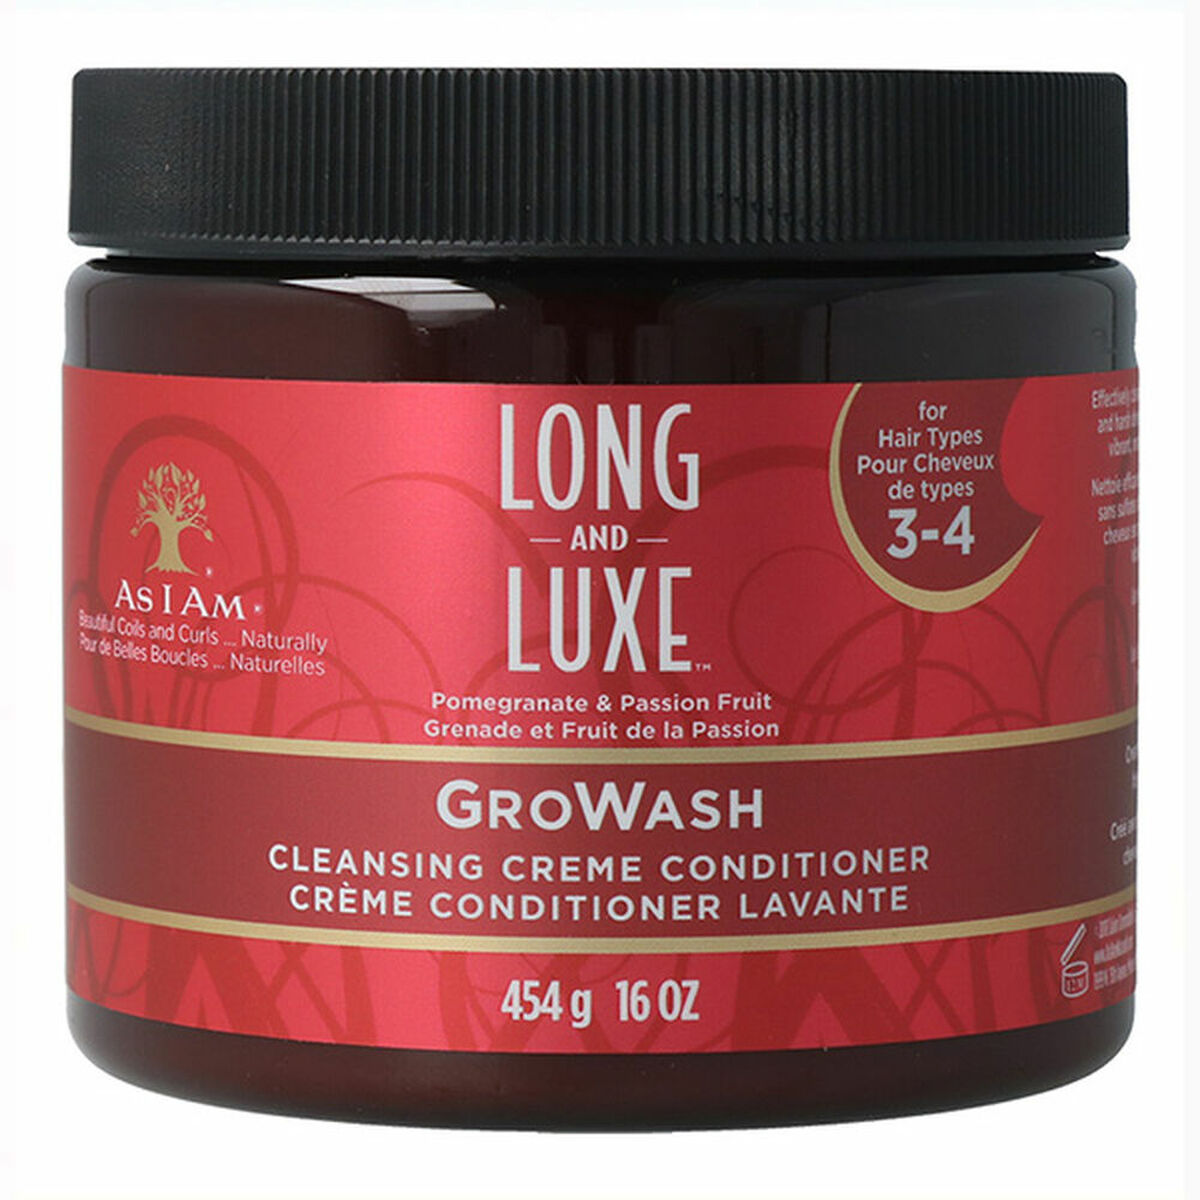 Balsam As I Am Long And Luxe Growash (454 g)